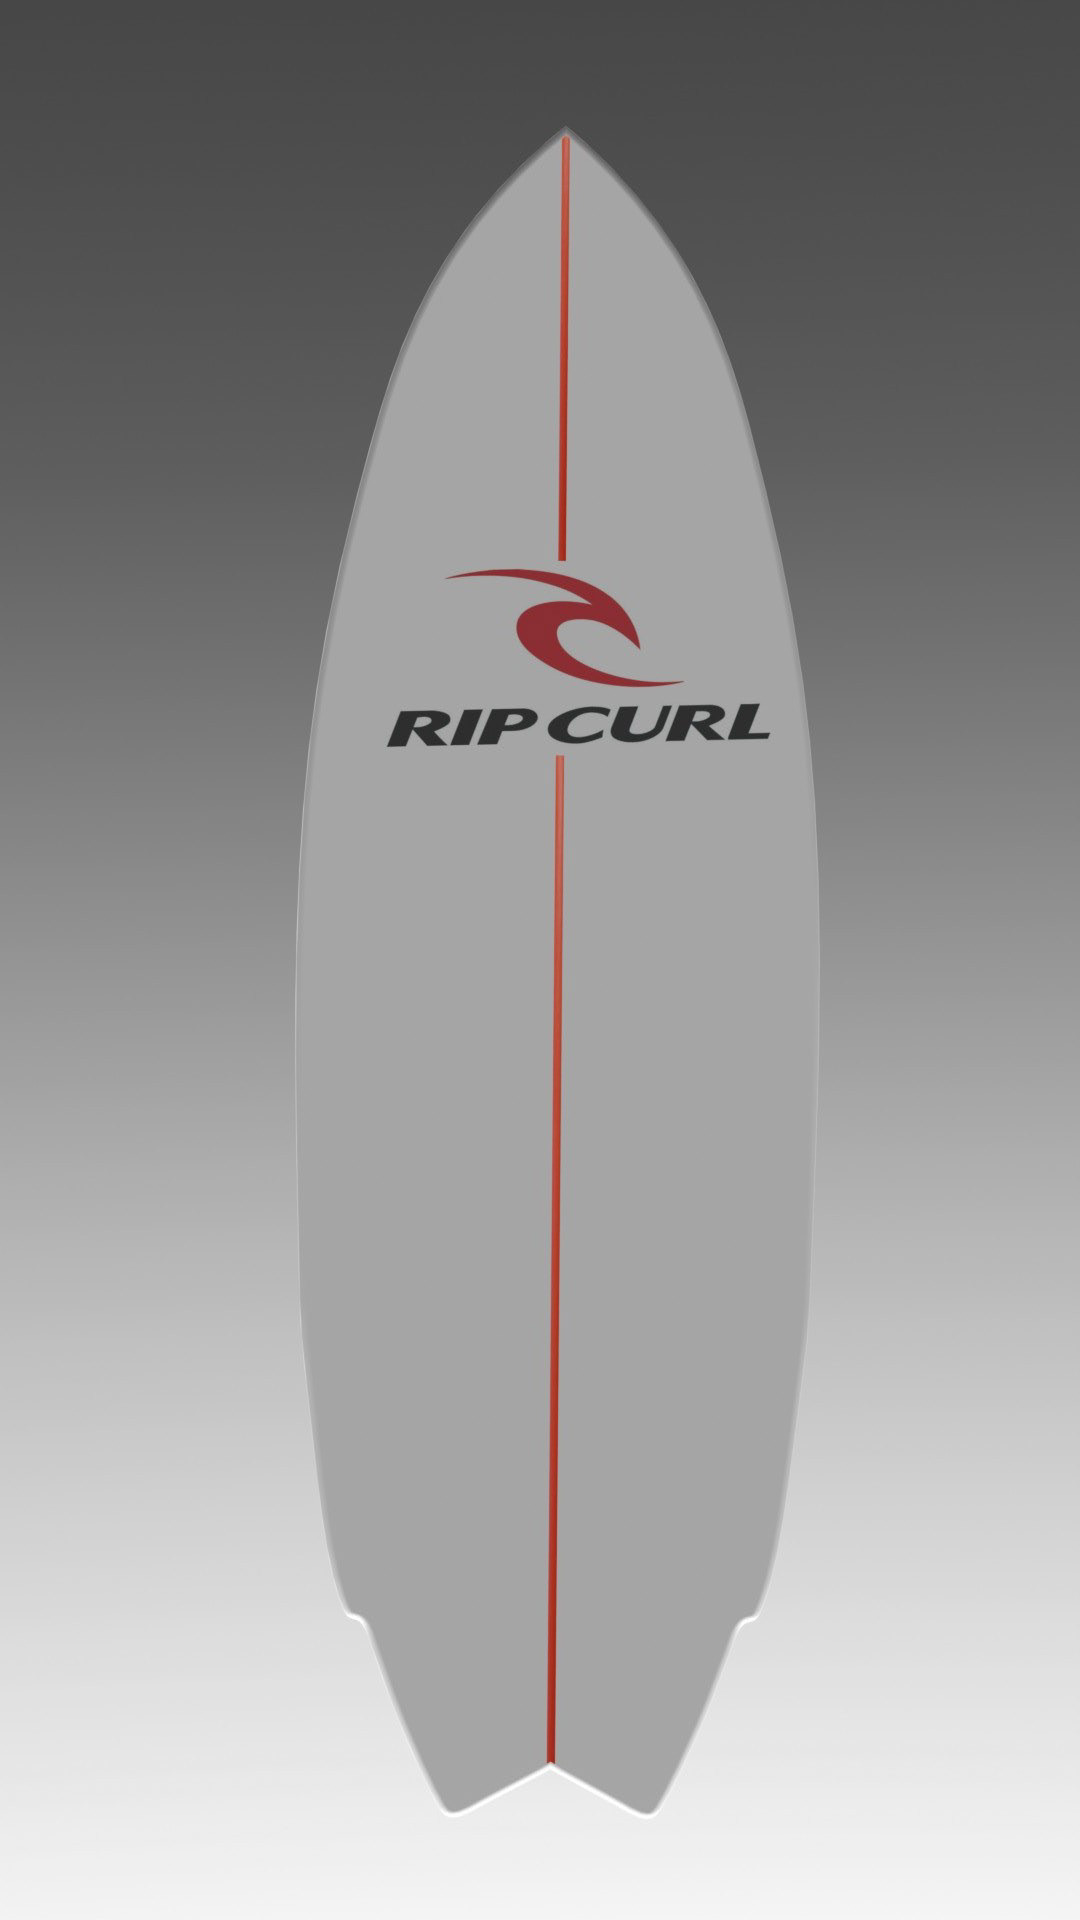 RIP curl Surf Board Internet camera tablet touchscreen